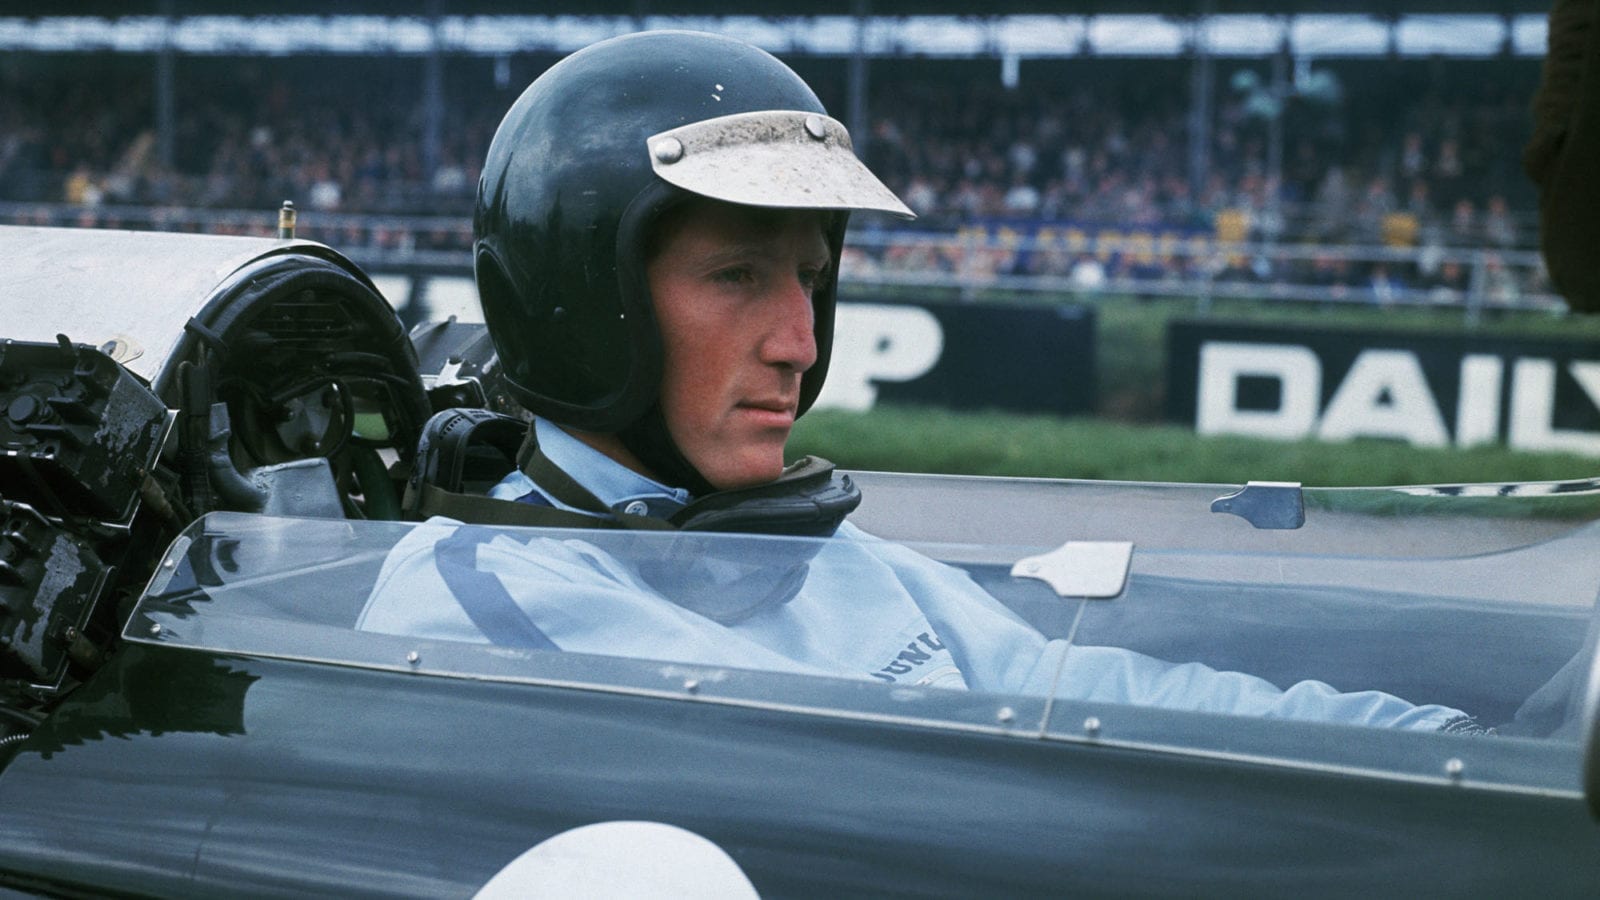 Rindt lead